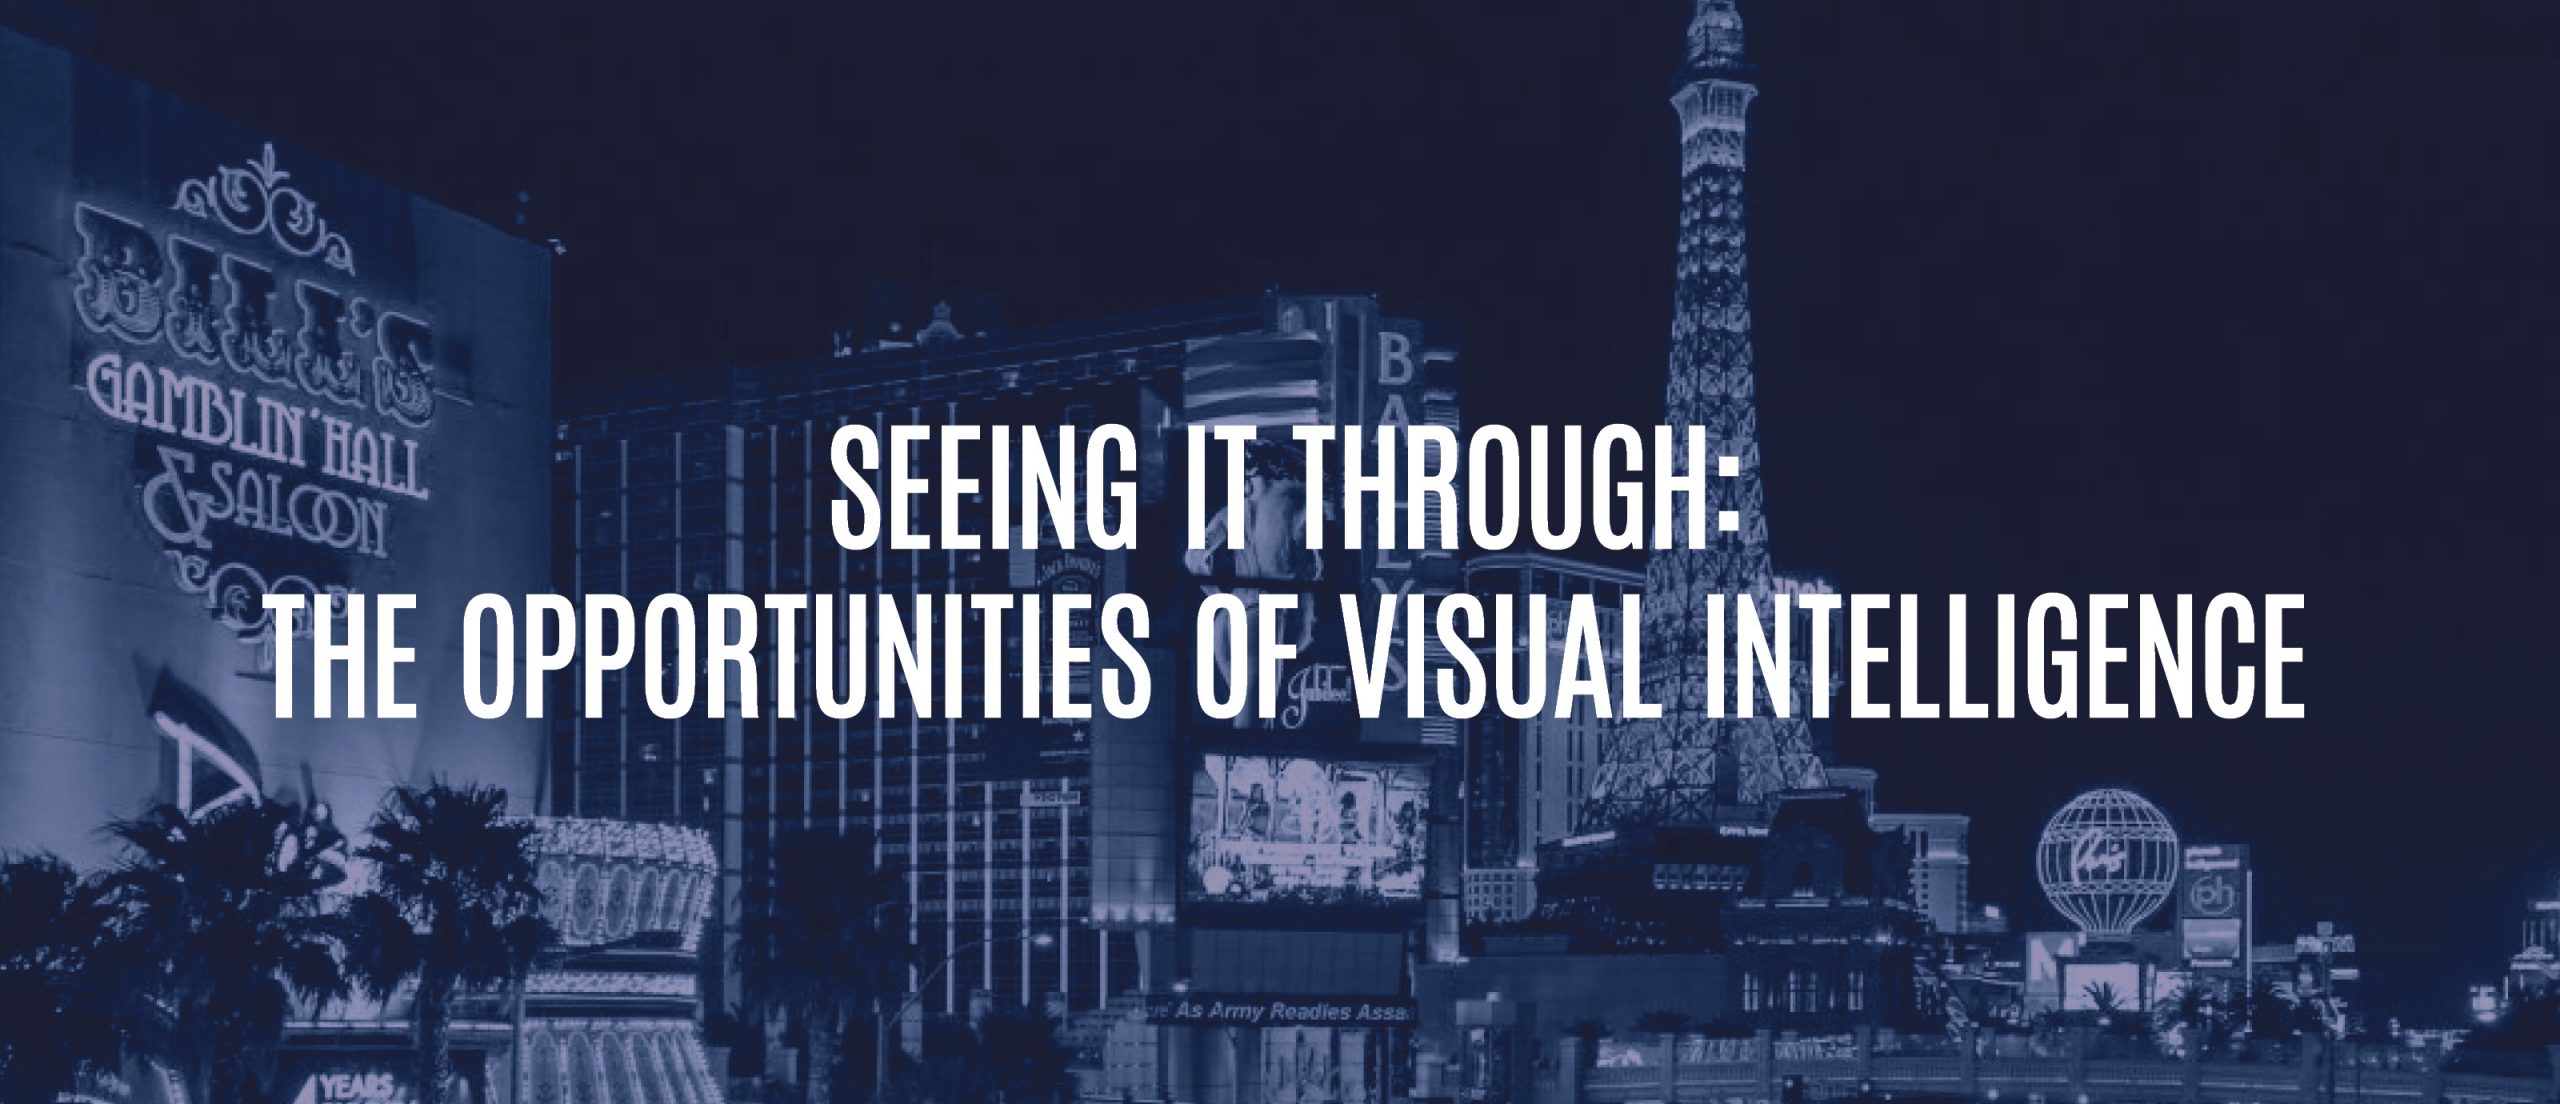 Blog Title - Seeing it through: The opportunities of visual intelligence